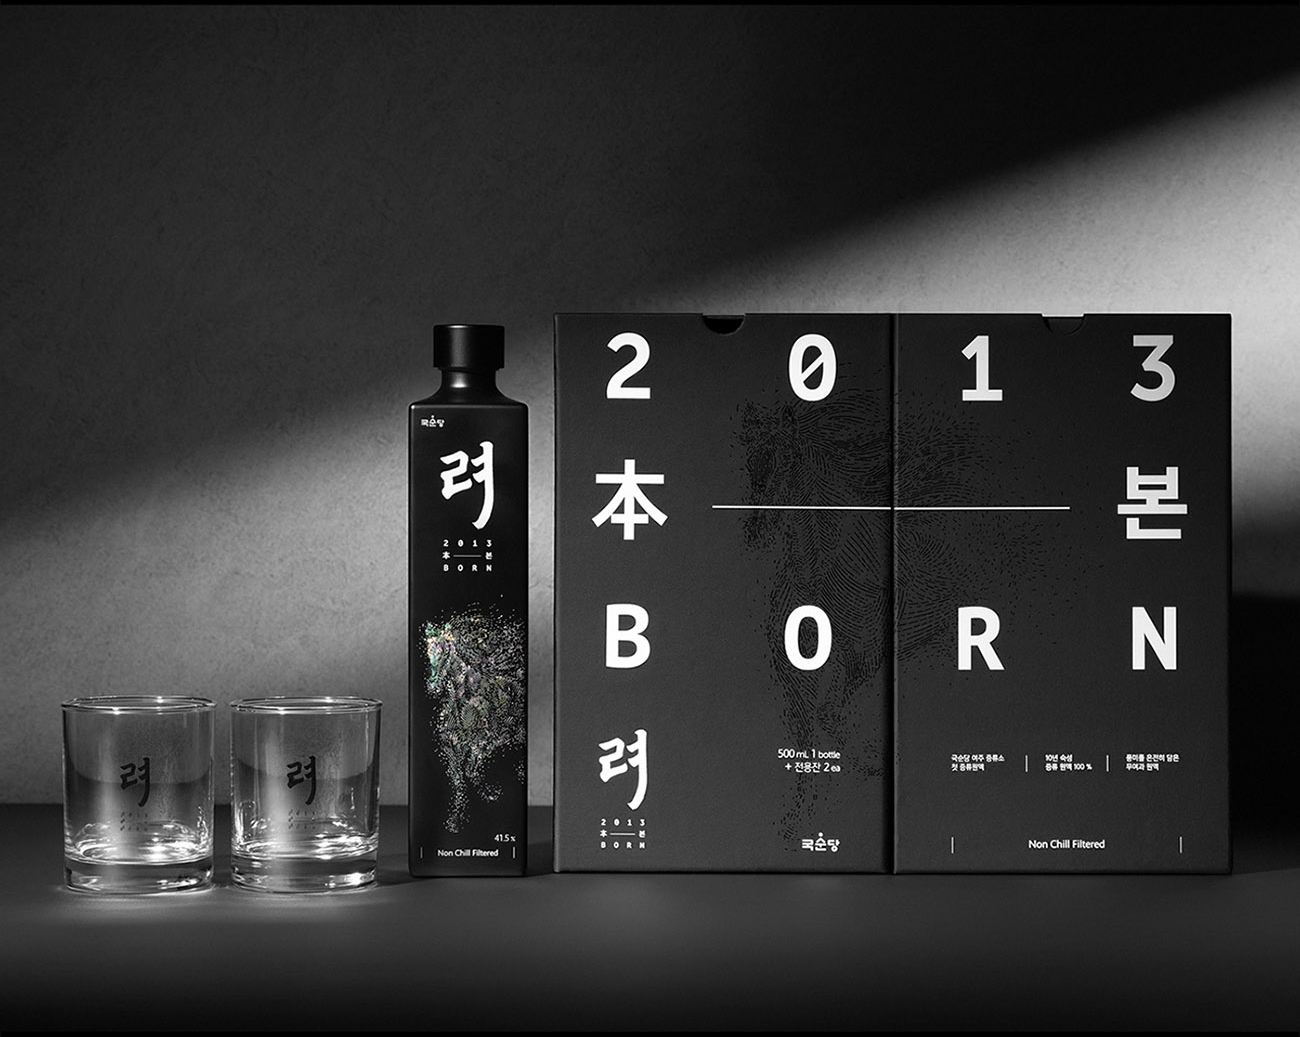 KookSoonDang's REA 2013 BORN: A Blend of Tradition and Modernity in Soju Packaging Design